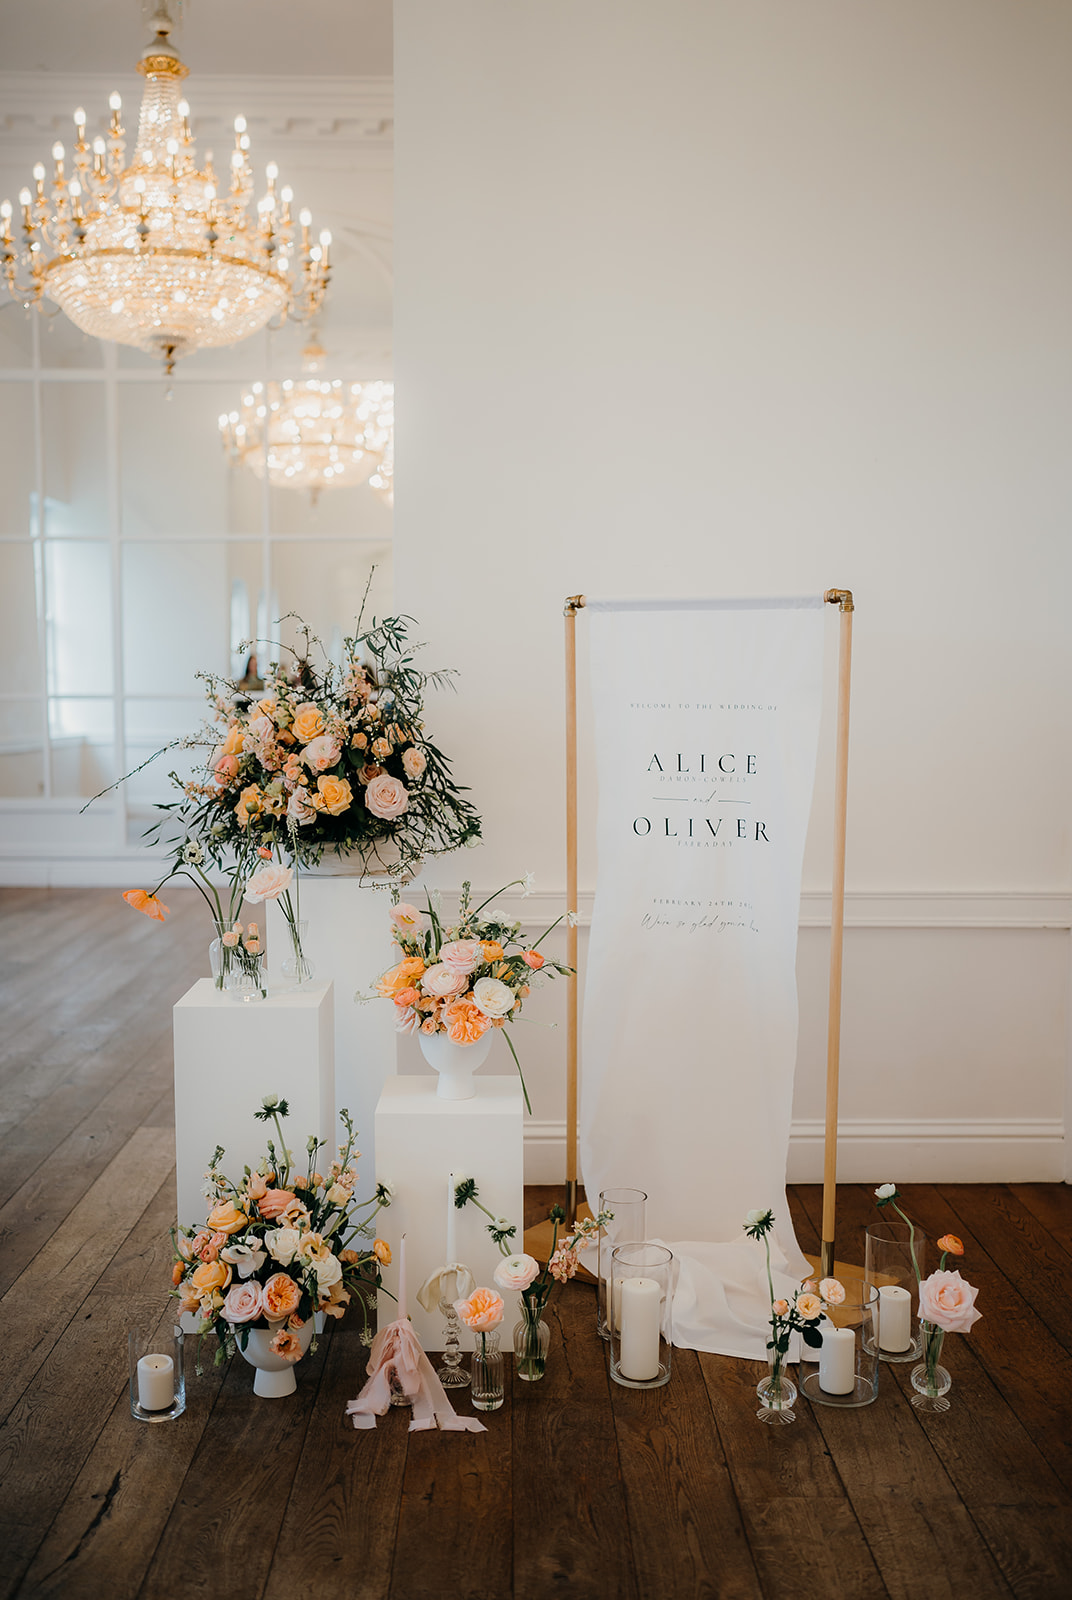 Peach wedding styling details at Norwood Park